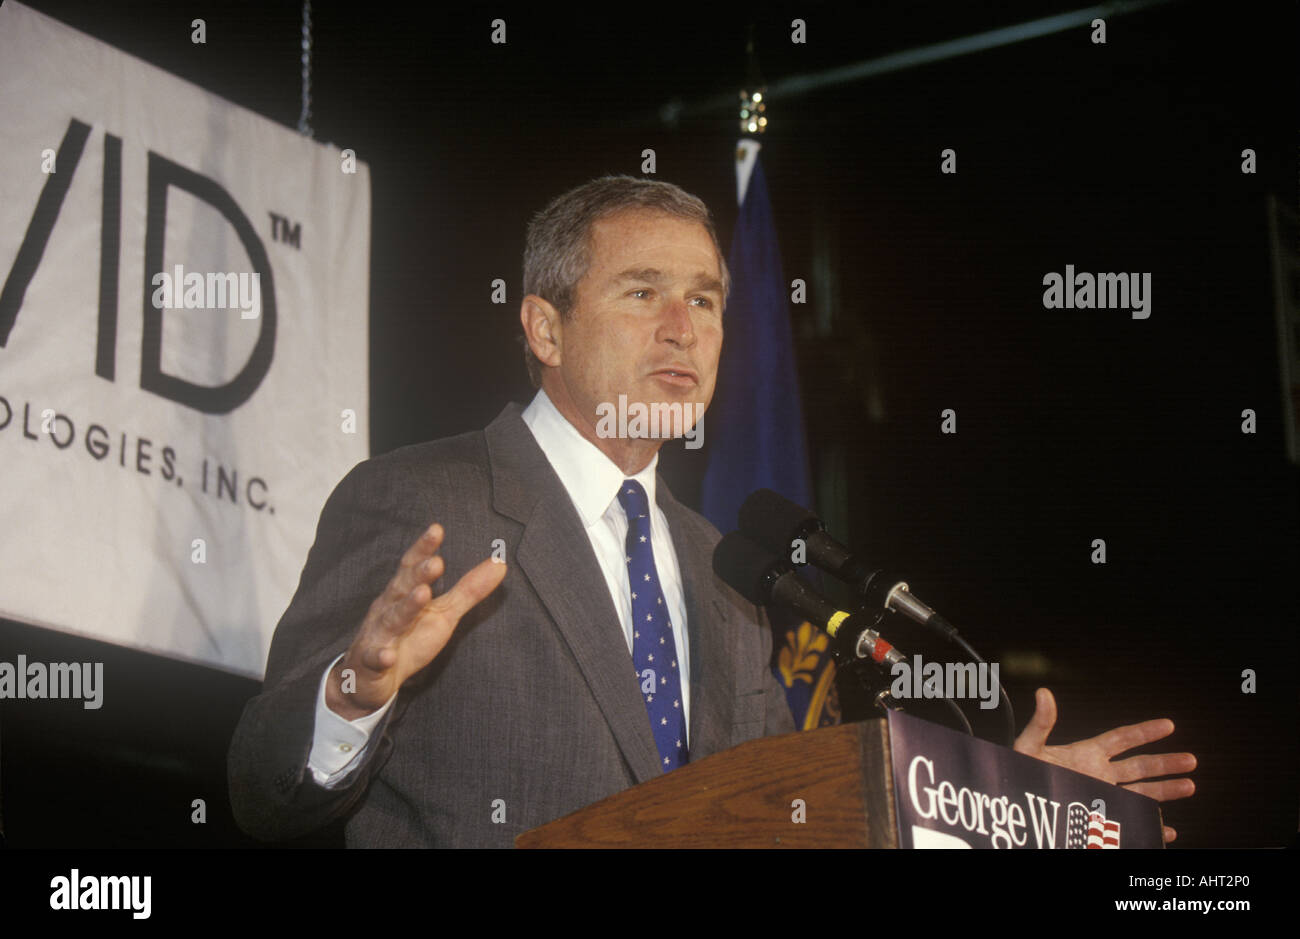 George W Bush speaking from podium at campaign rally Laconia NH January 2000 Stock Photo